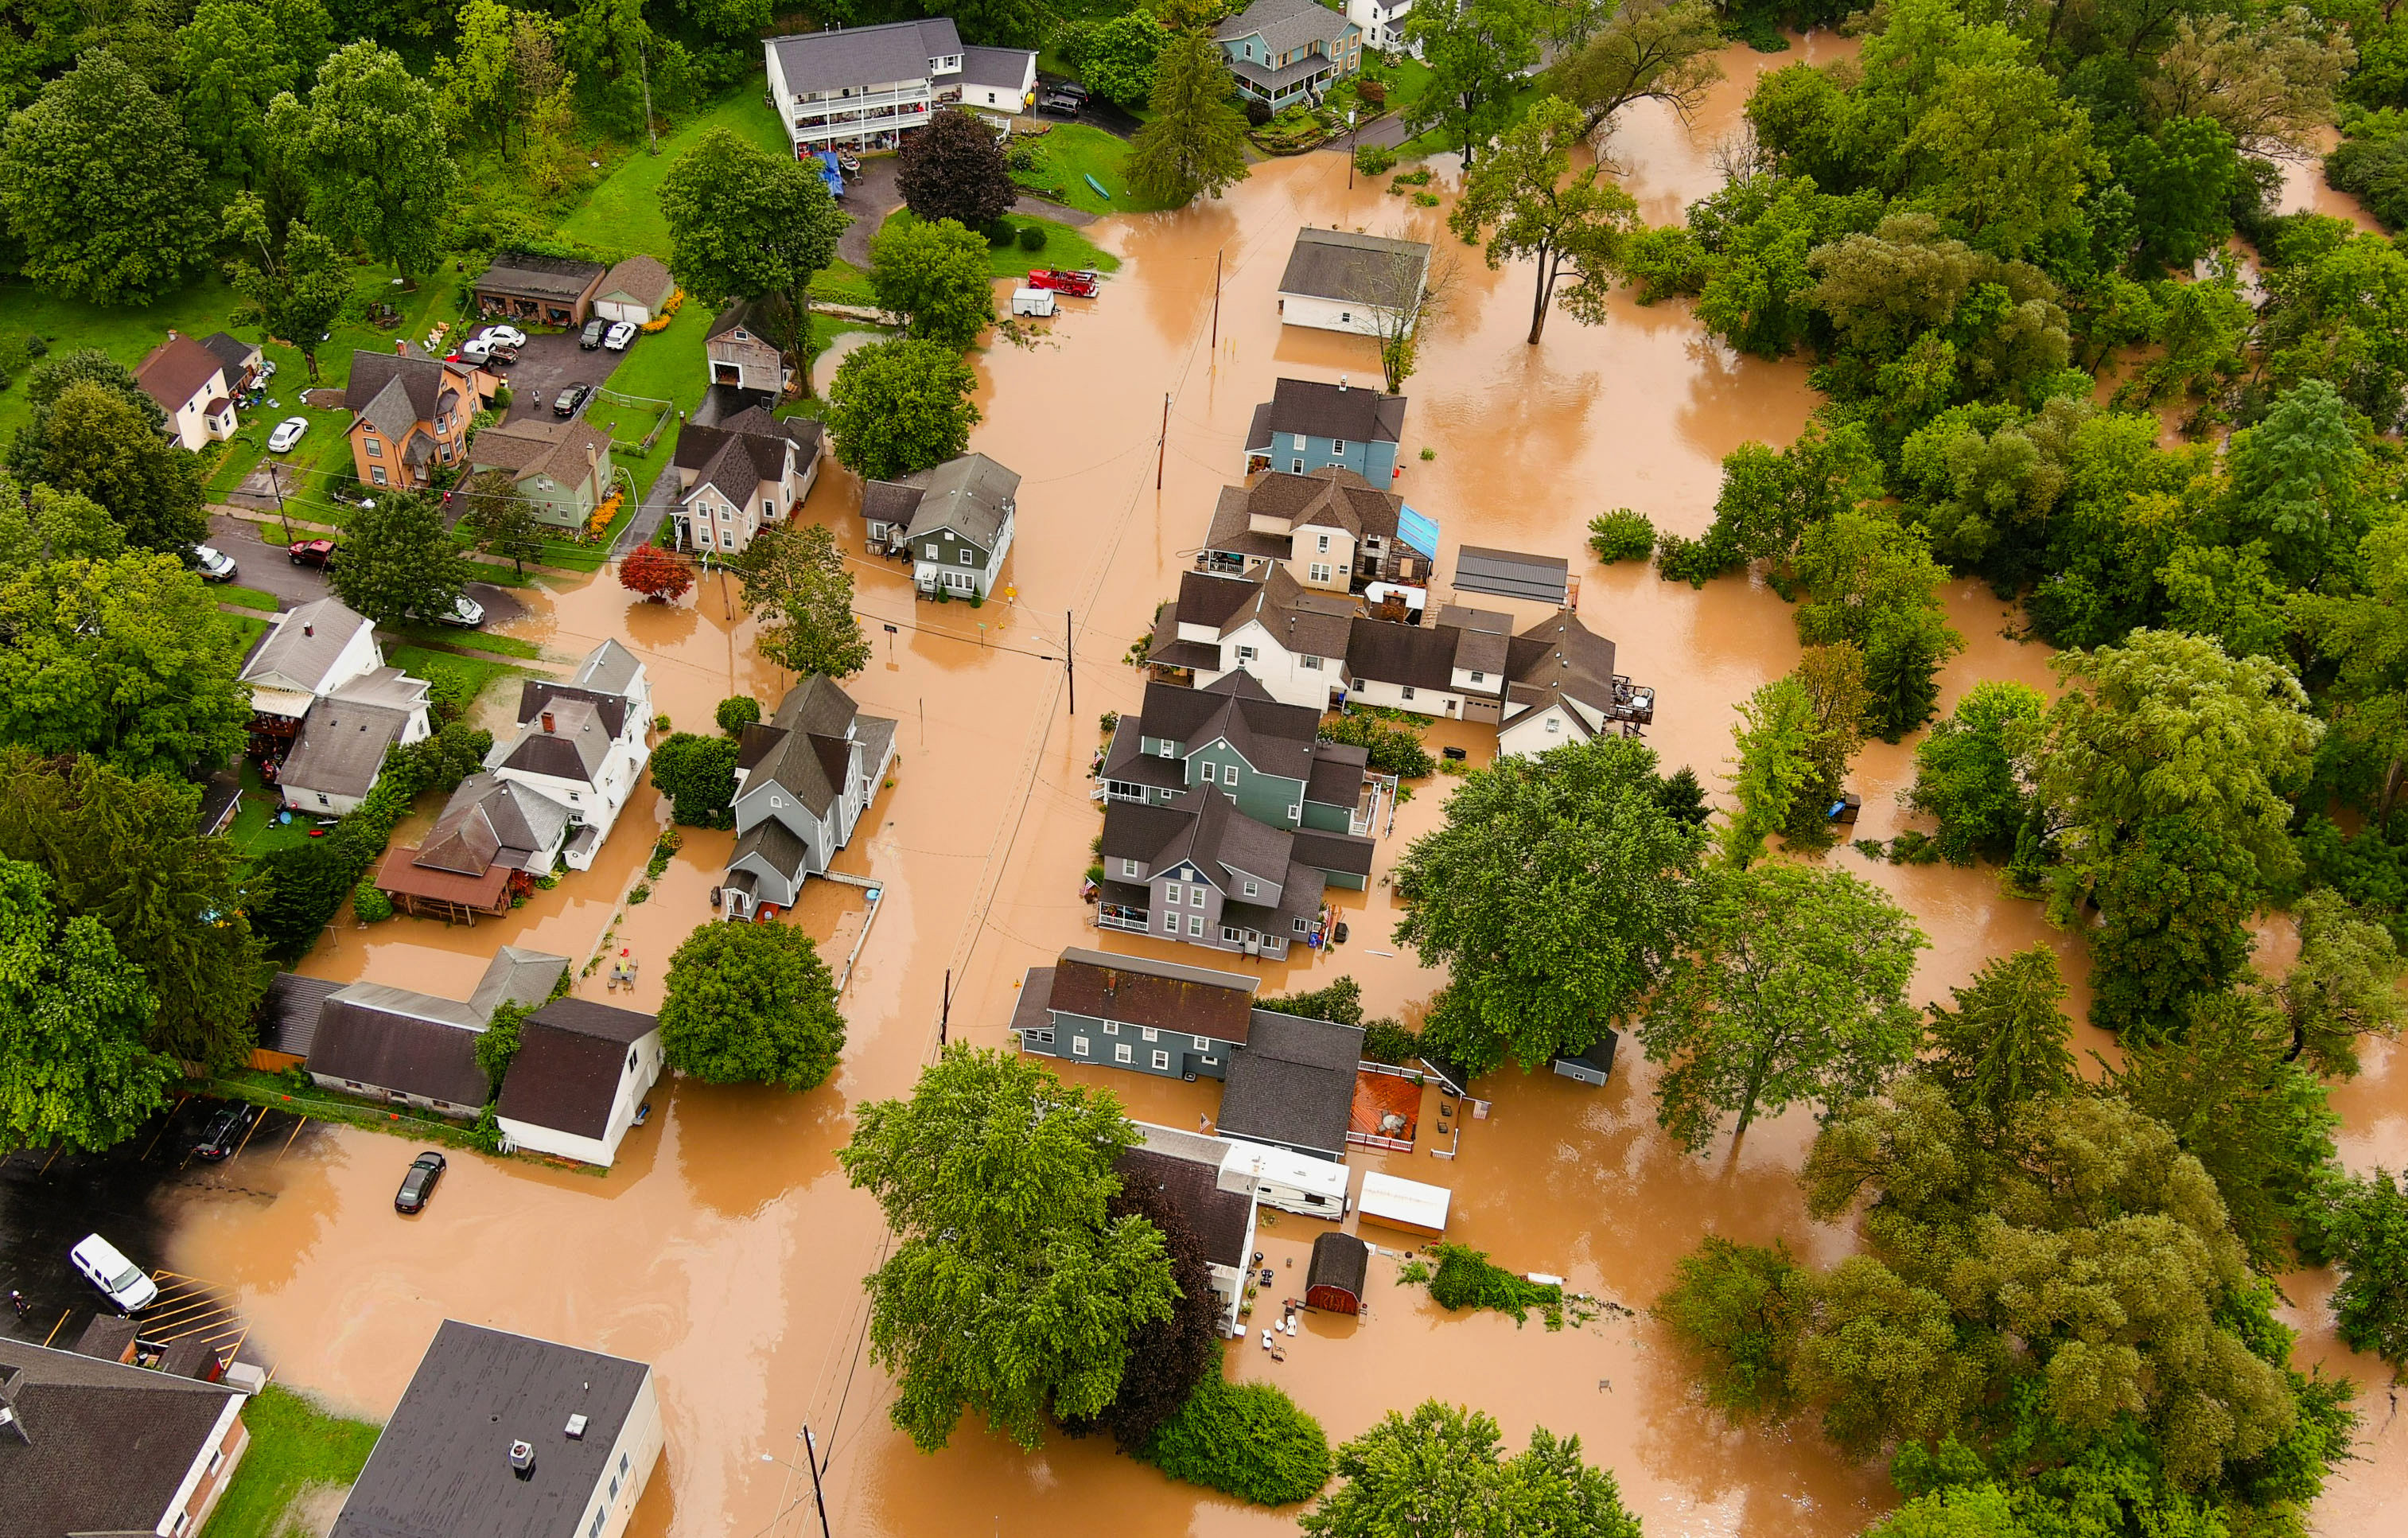 An aerial view of the Village of Camillus where Ninemile Creek flooded streets August 19, 2021, after heavy rainfall.